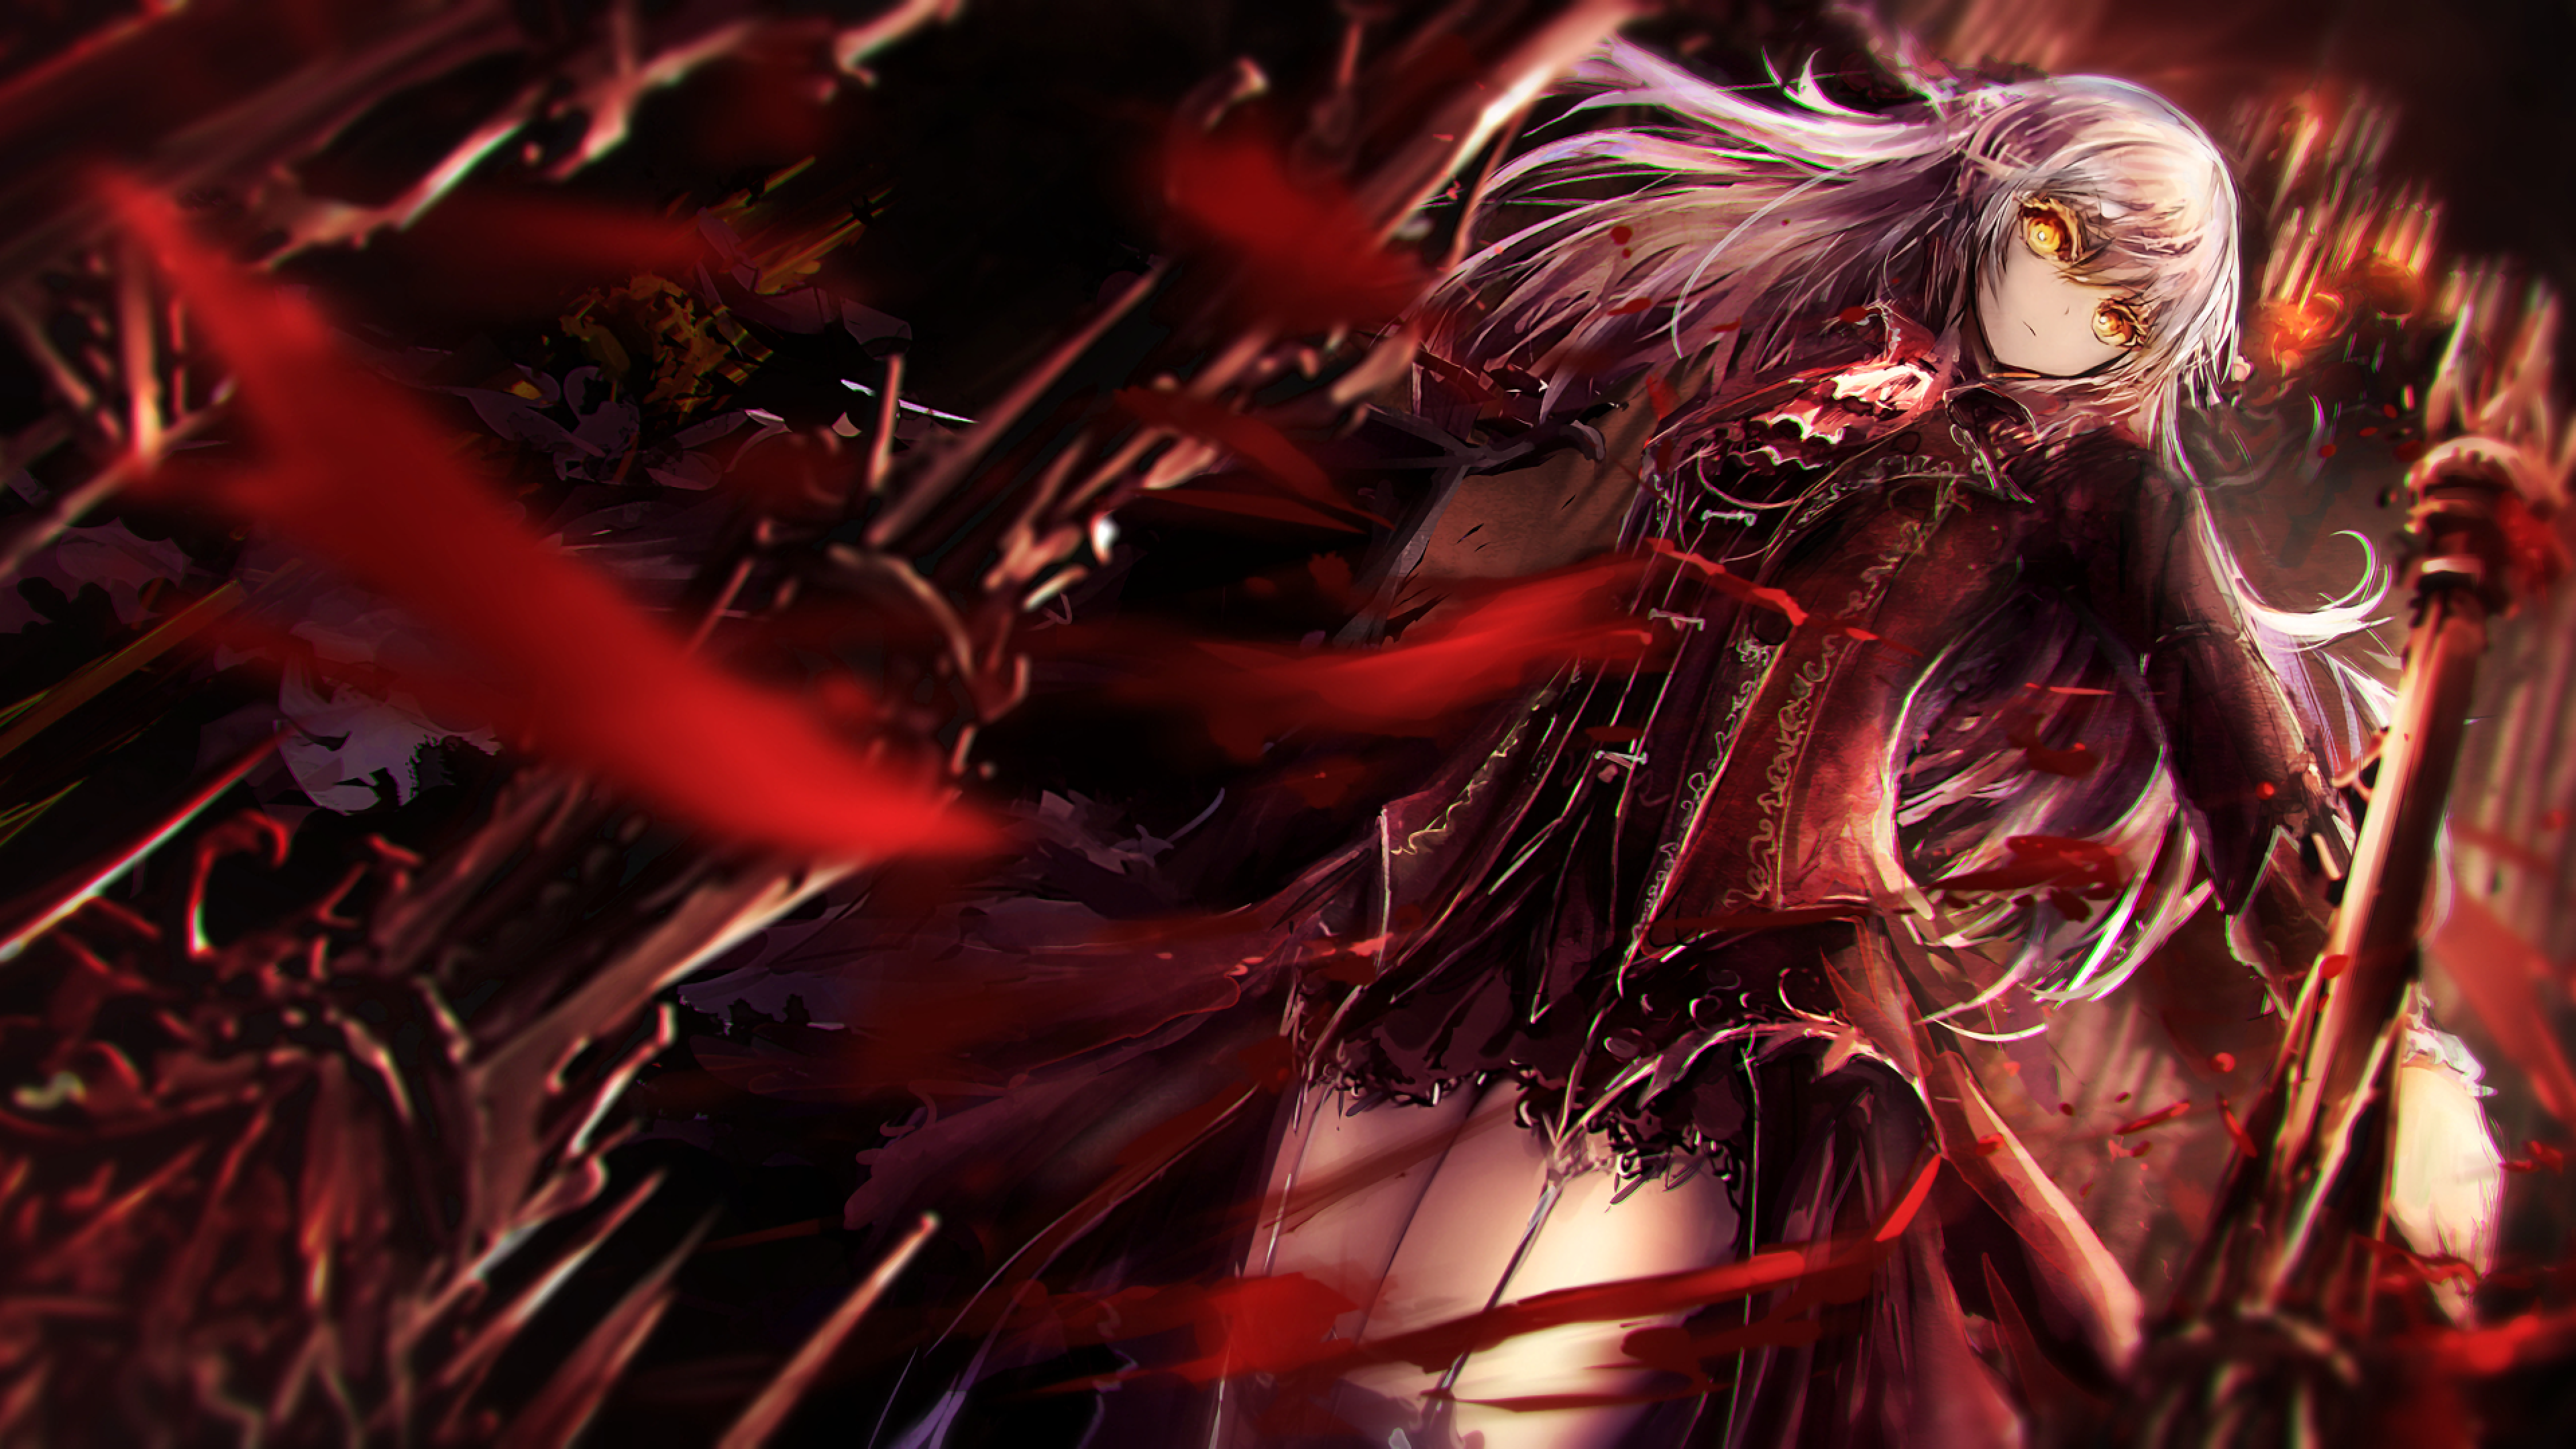 Download 3840x2160 Anime Girl, Worm View, Dress, Sword Wallpaper for UHD TV